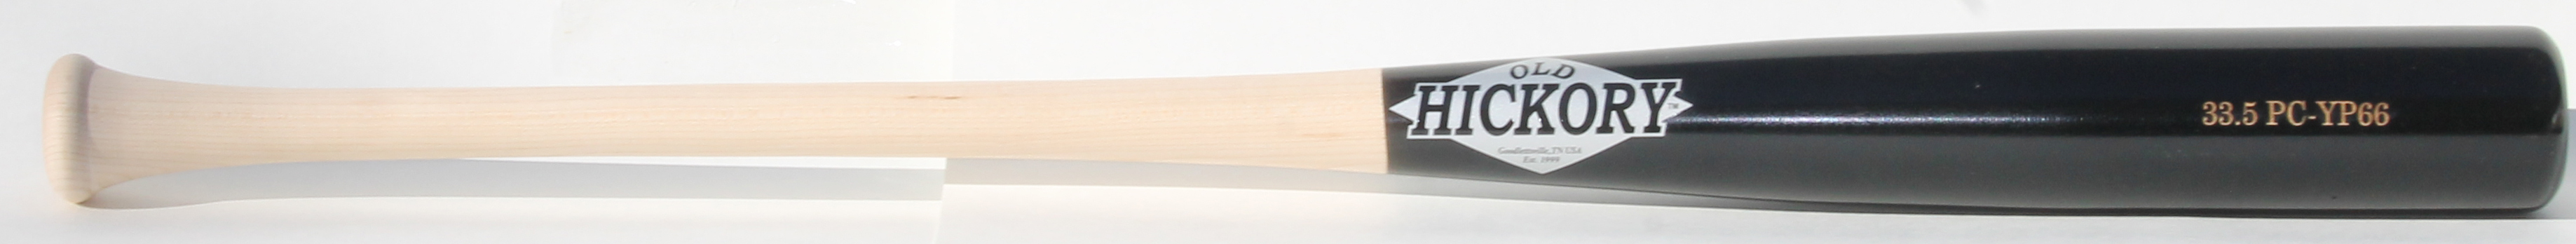 1636 Details about    Old Hickory Maple Bat PC-YP66 Model Purple Reign Ink Dot Length-33 